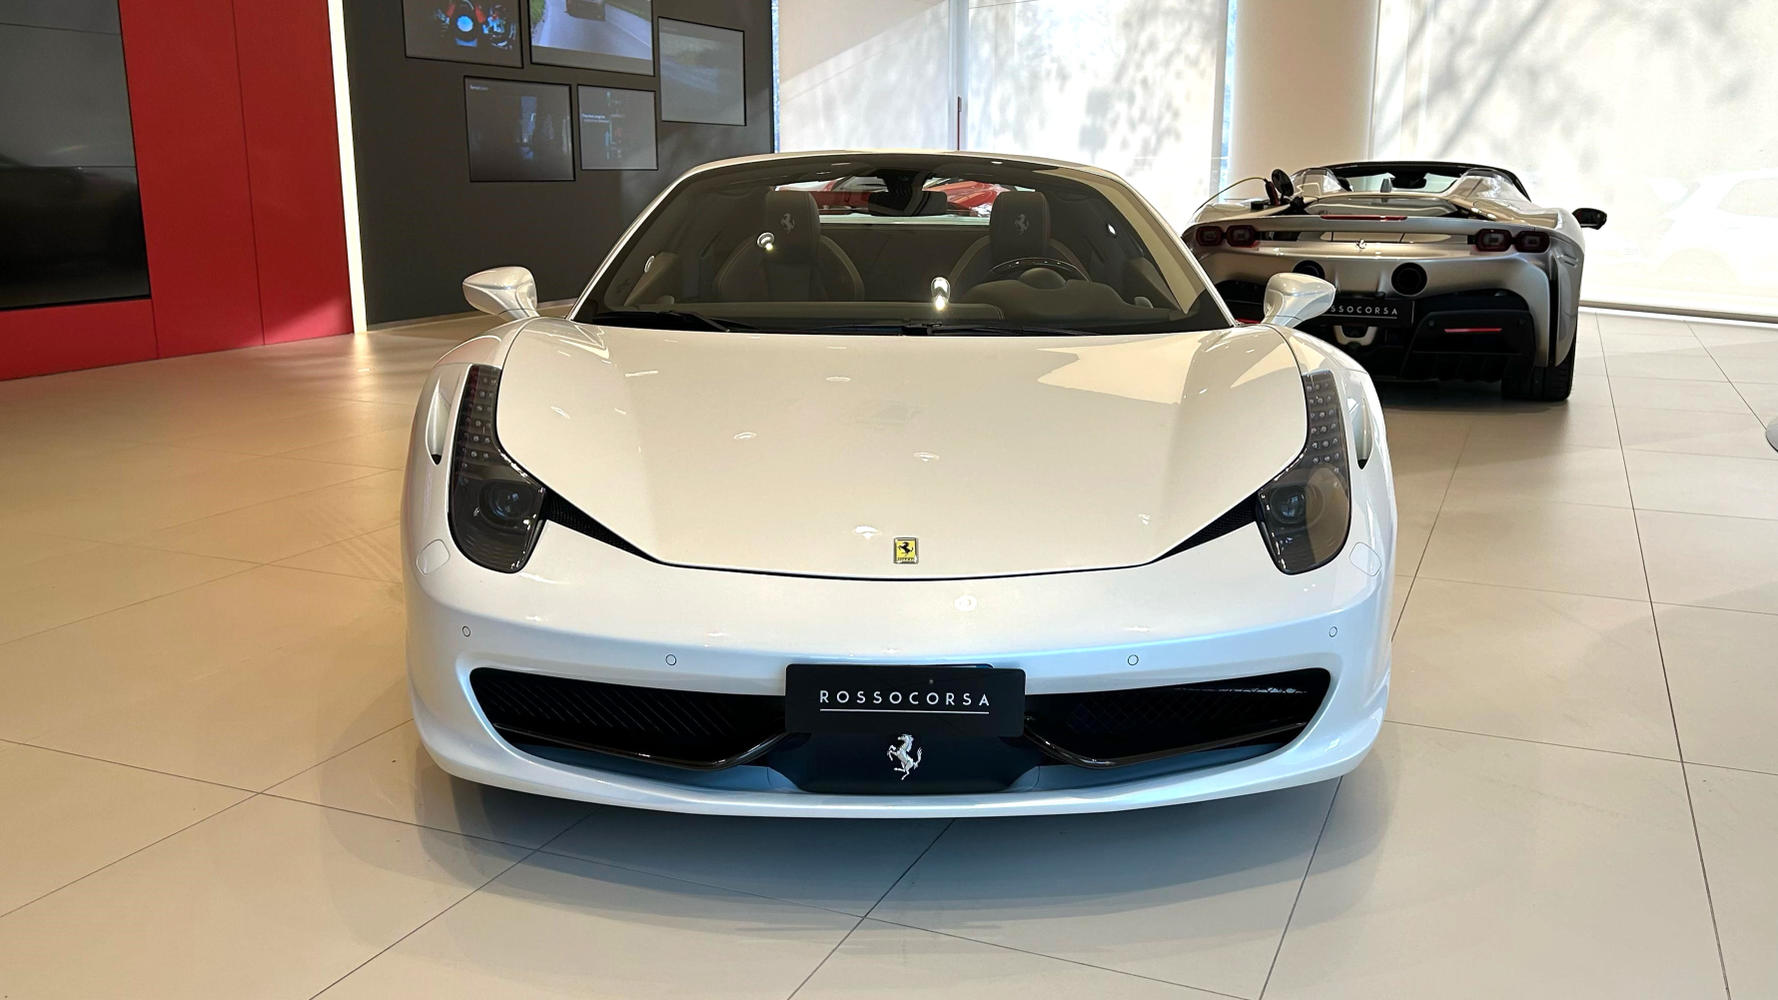 Used 458 Spider 2012 for sale in Torino | Ferrari Approved